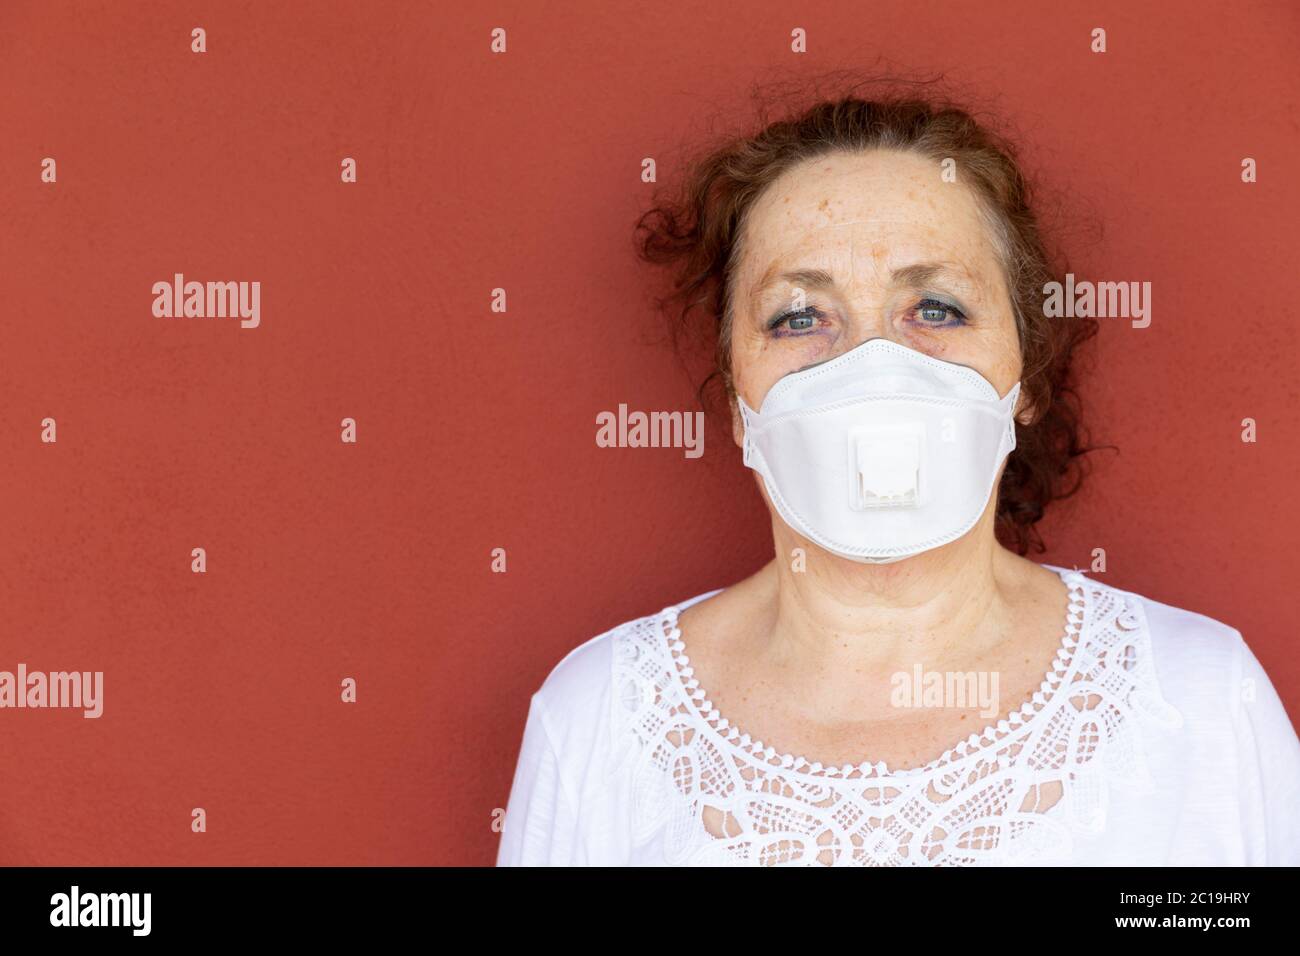 Portrait of old woman with protective face mask on red wall. Confinement by coronavirus. Covid-19 concept. Stock Photo